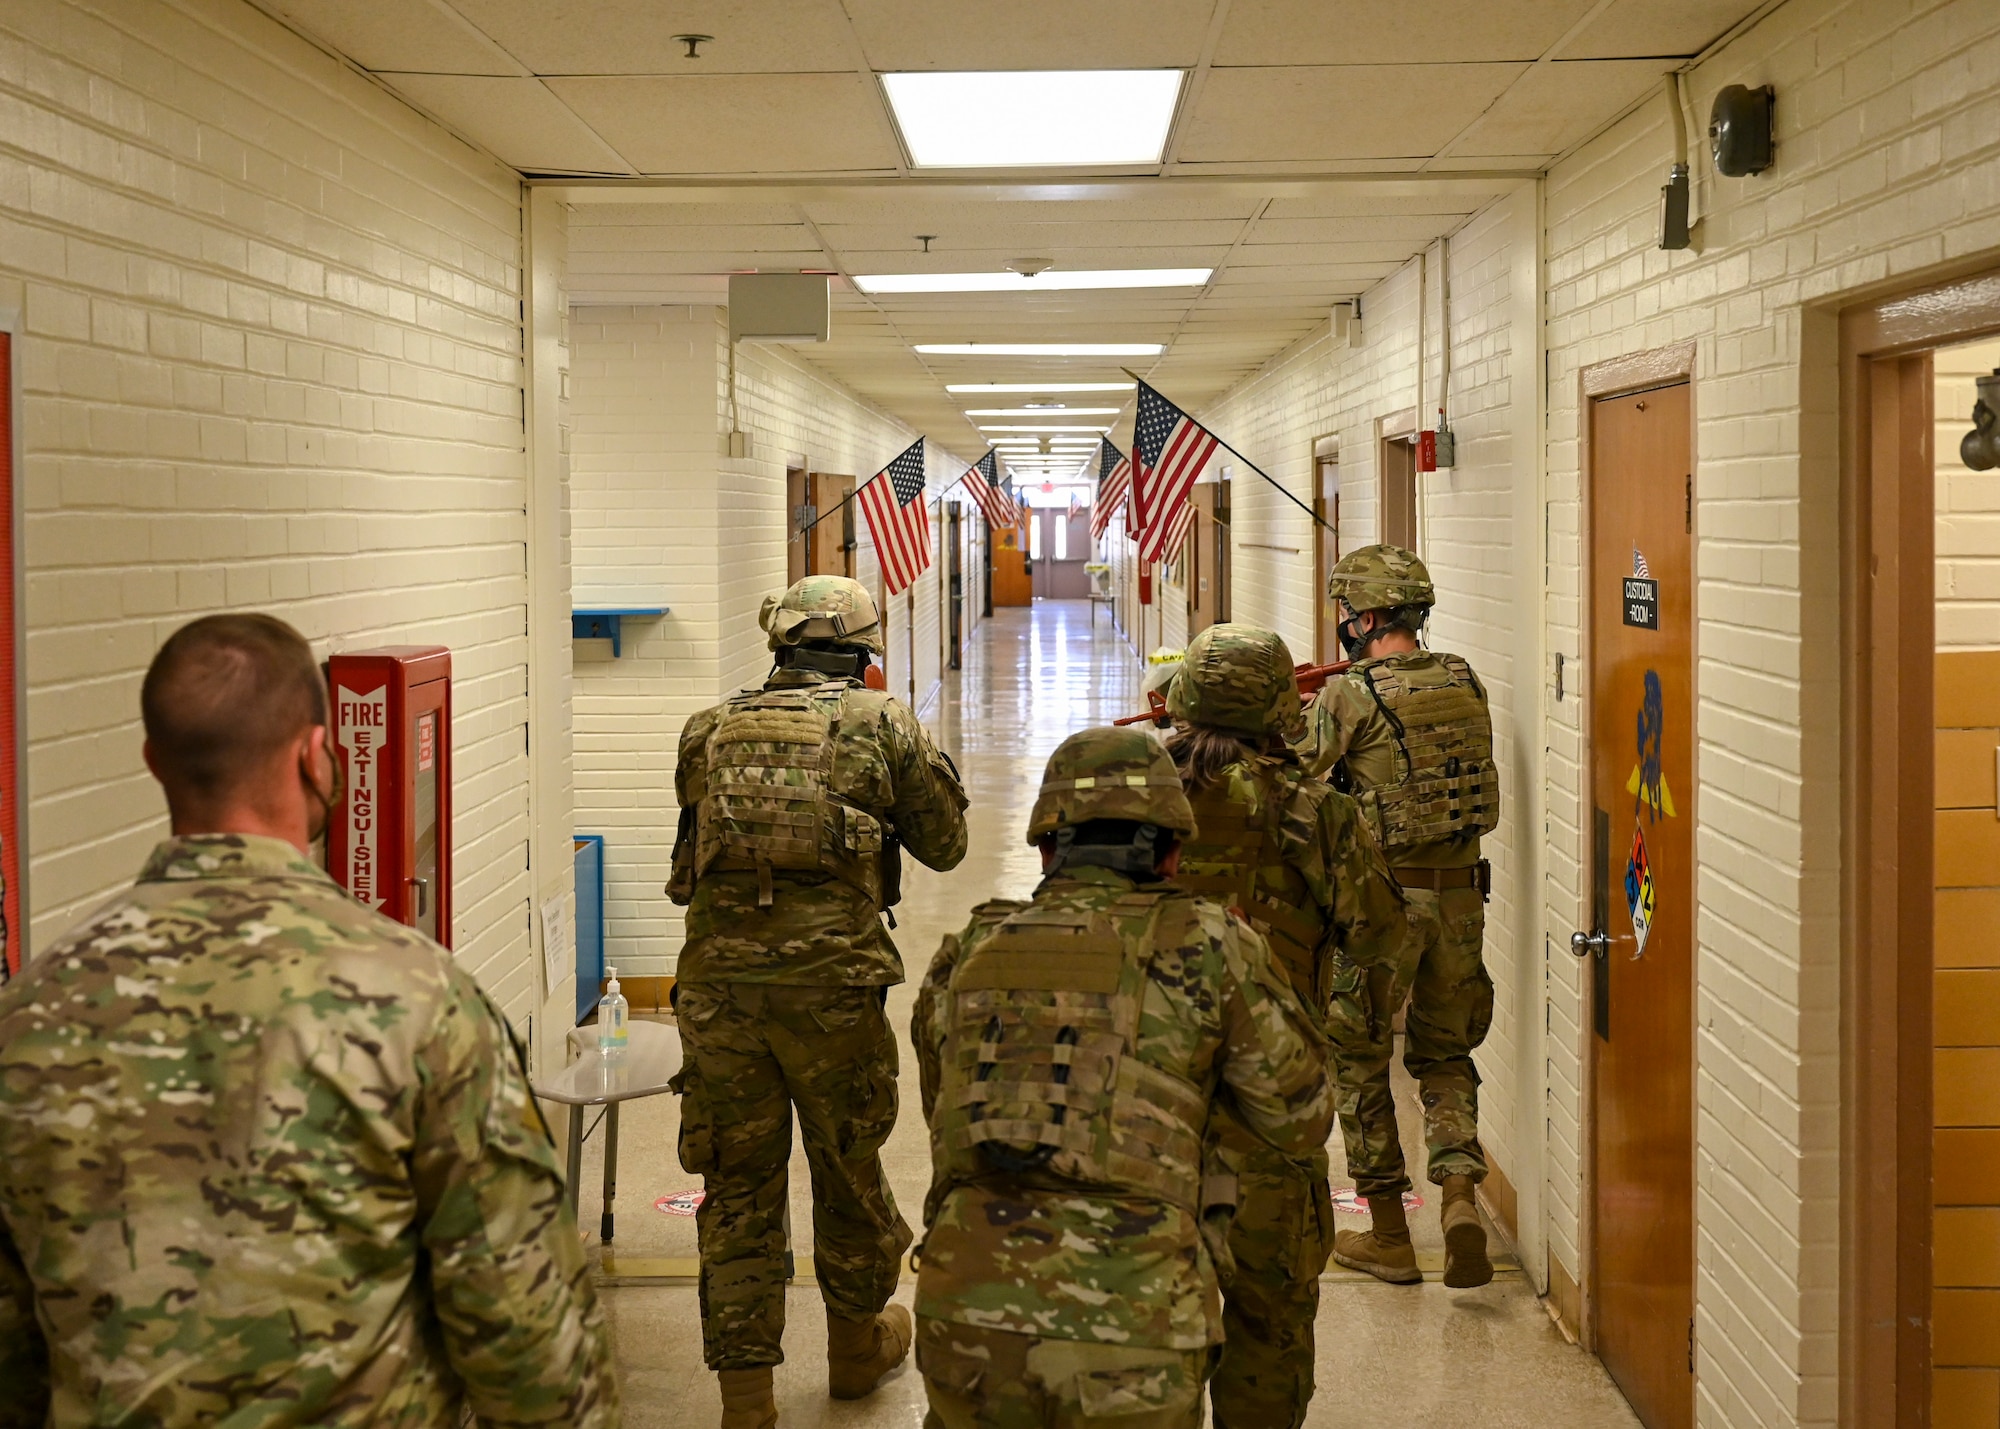 WSSS defenders enter a building to secure it from an active shooter